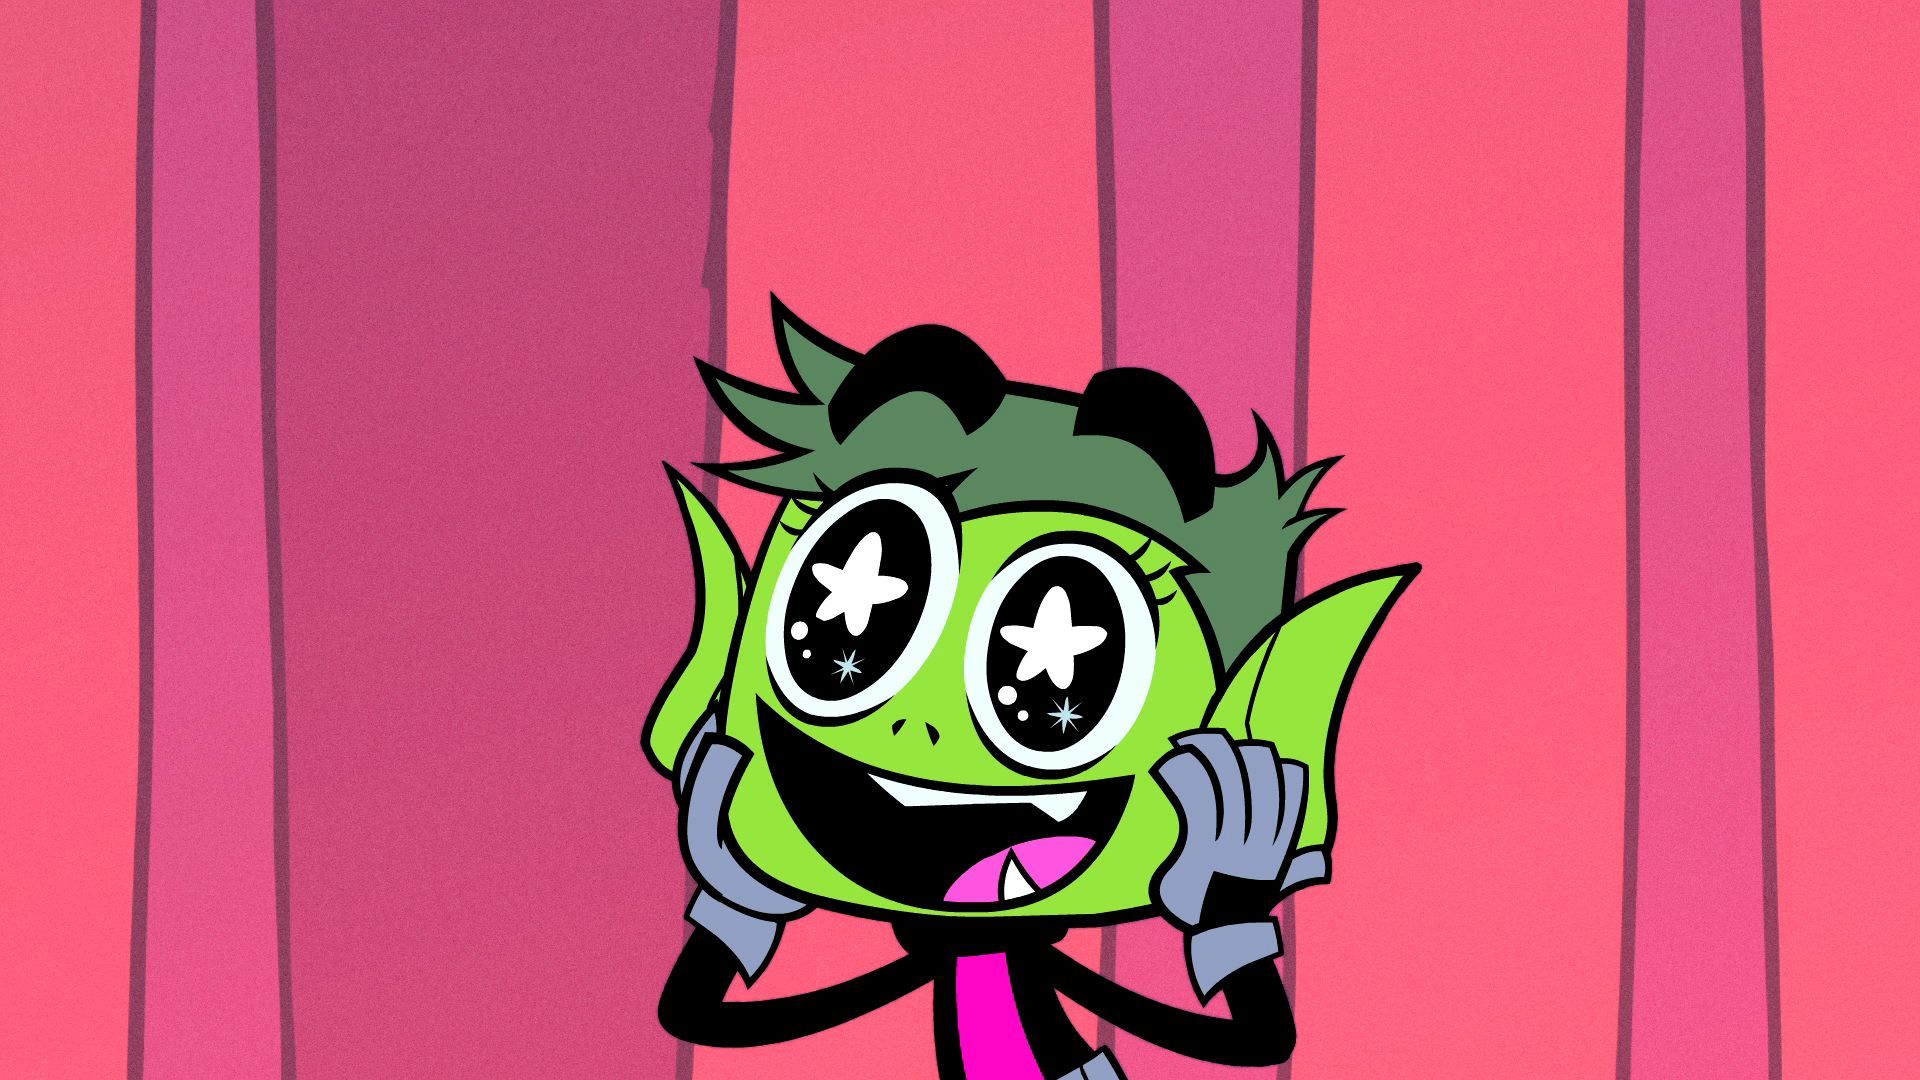 Teen Titans Go! Episode 5 'Ghost Boy' Clip and Images - Comic Vine